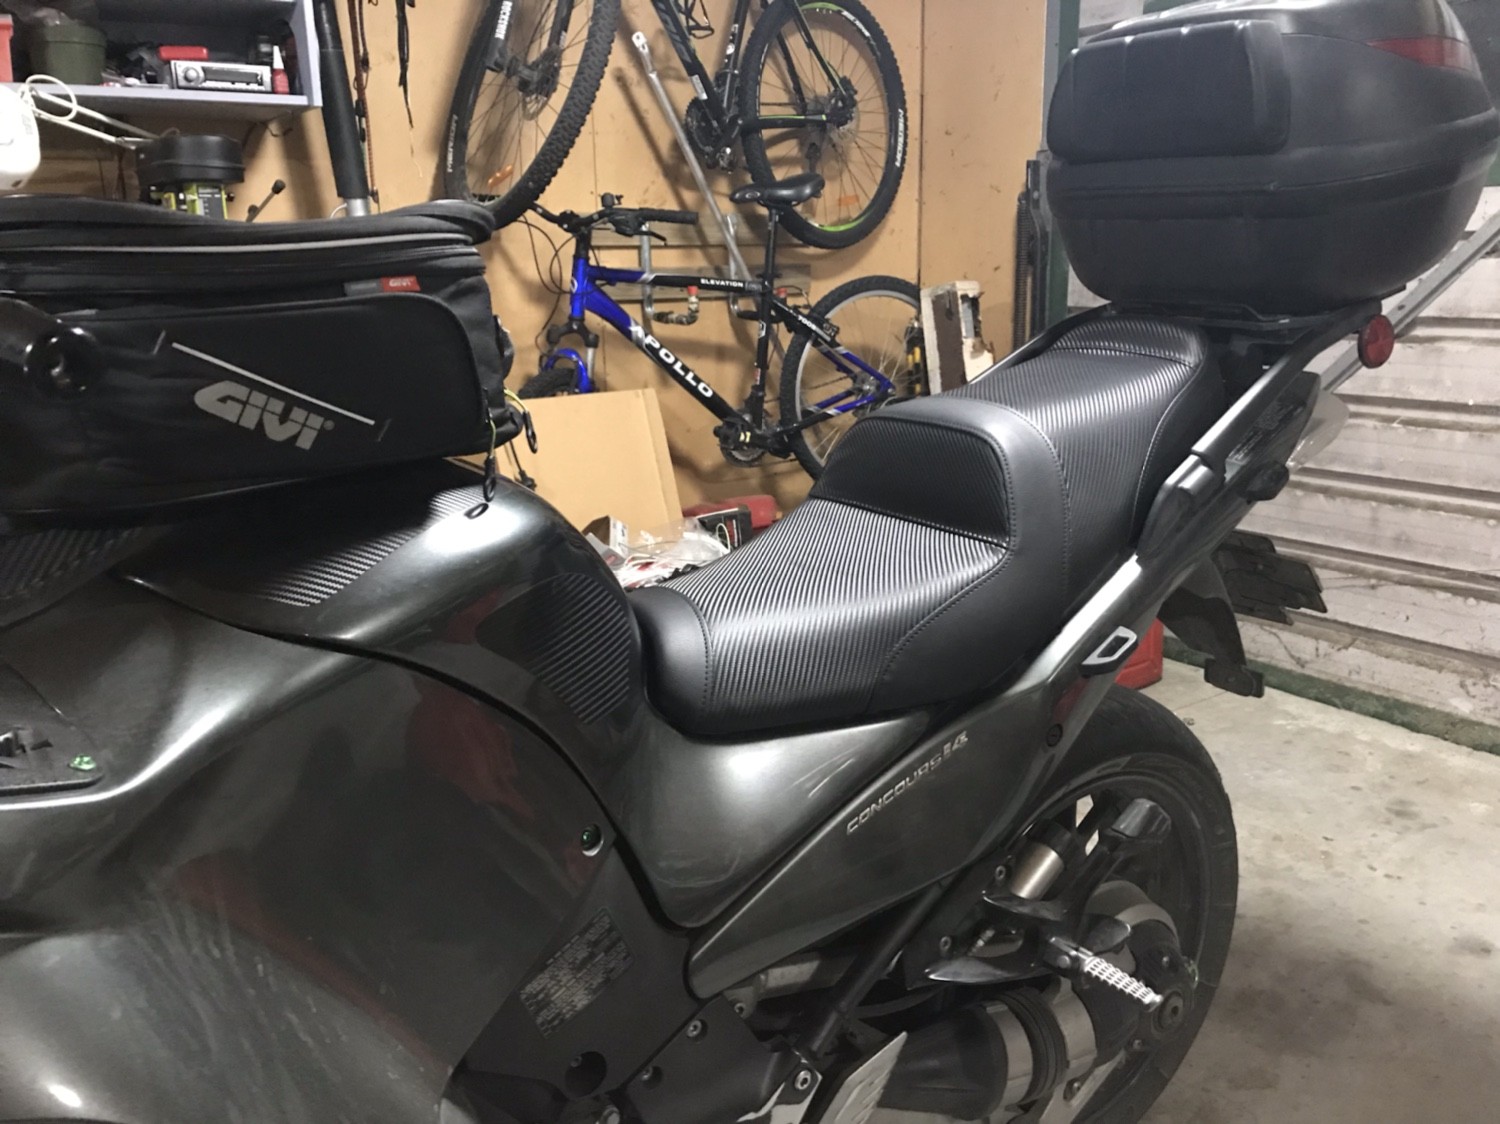 Saddlemen’s Stealth seat has arrived for the Concours 14